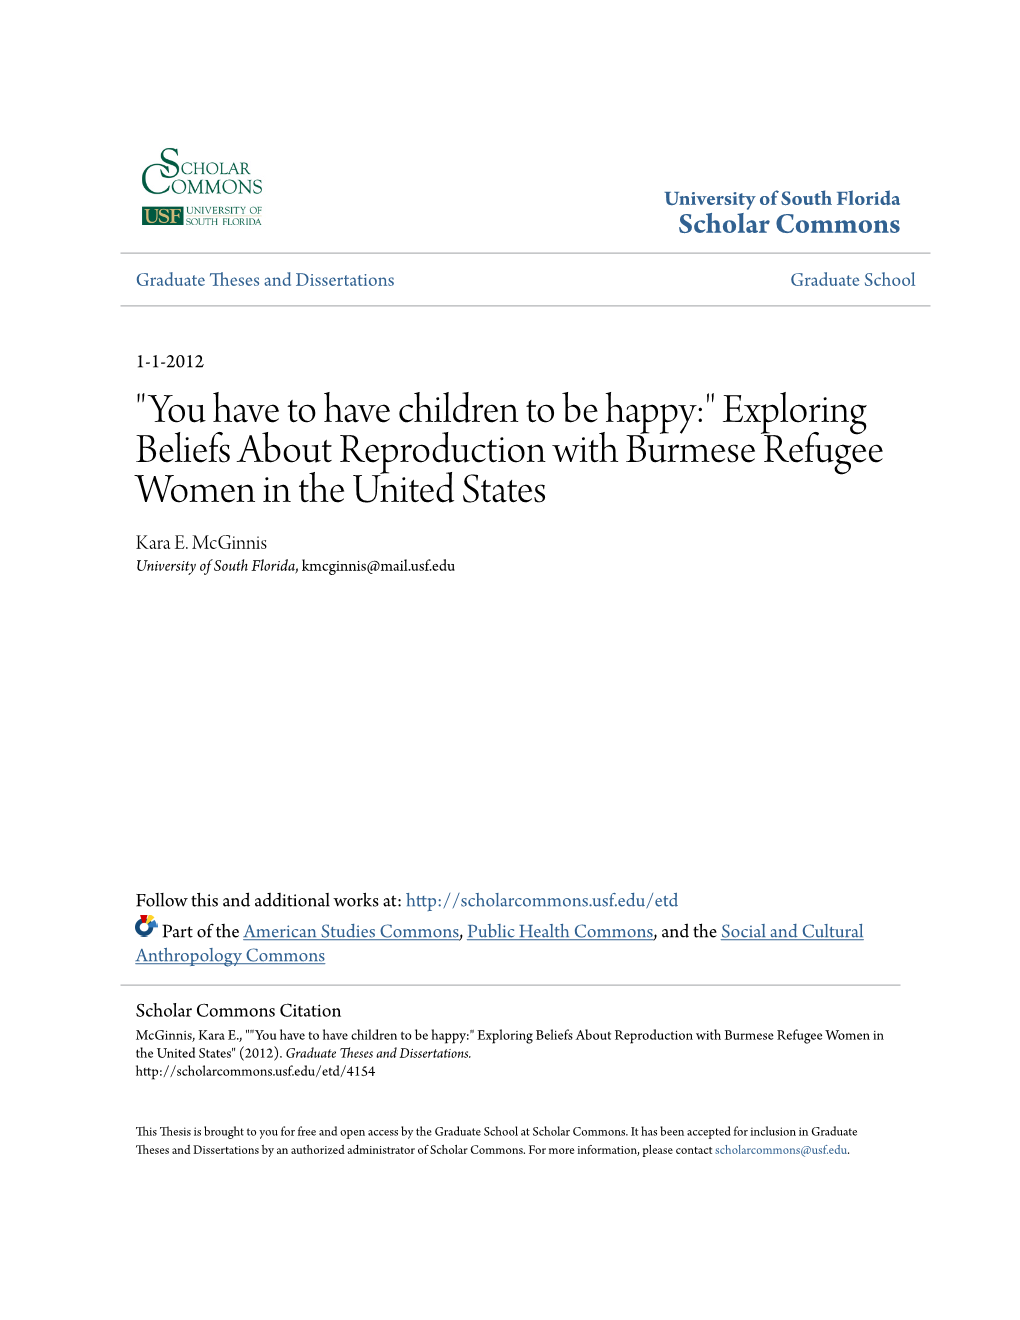 Exploring Beliefs About Reproduction with Burmese Refugee Women in the United States Kara E